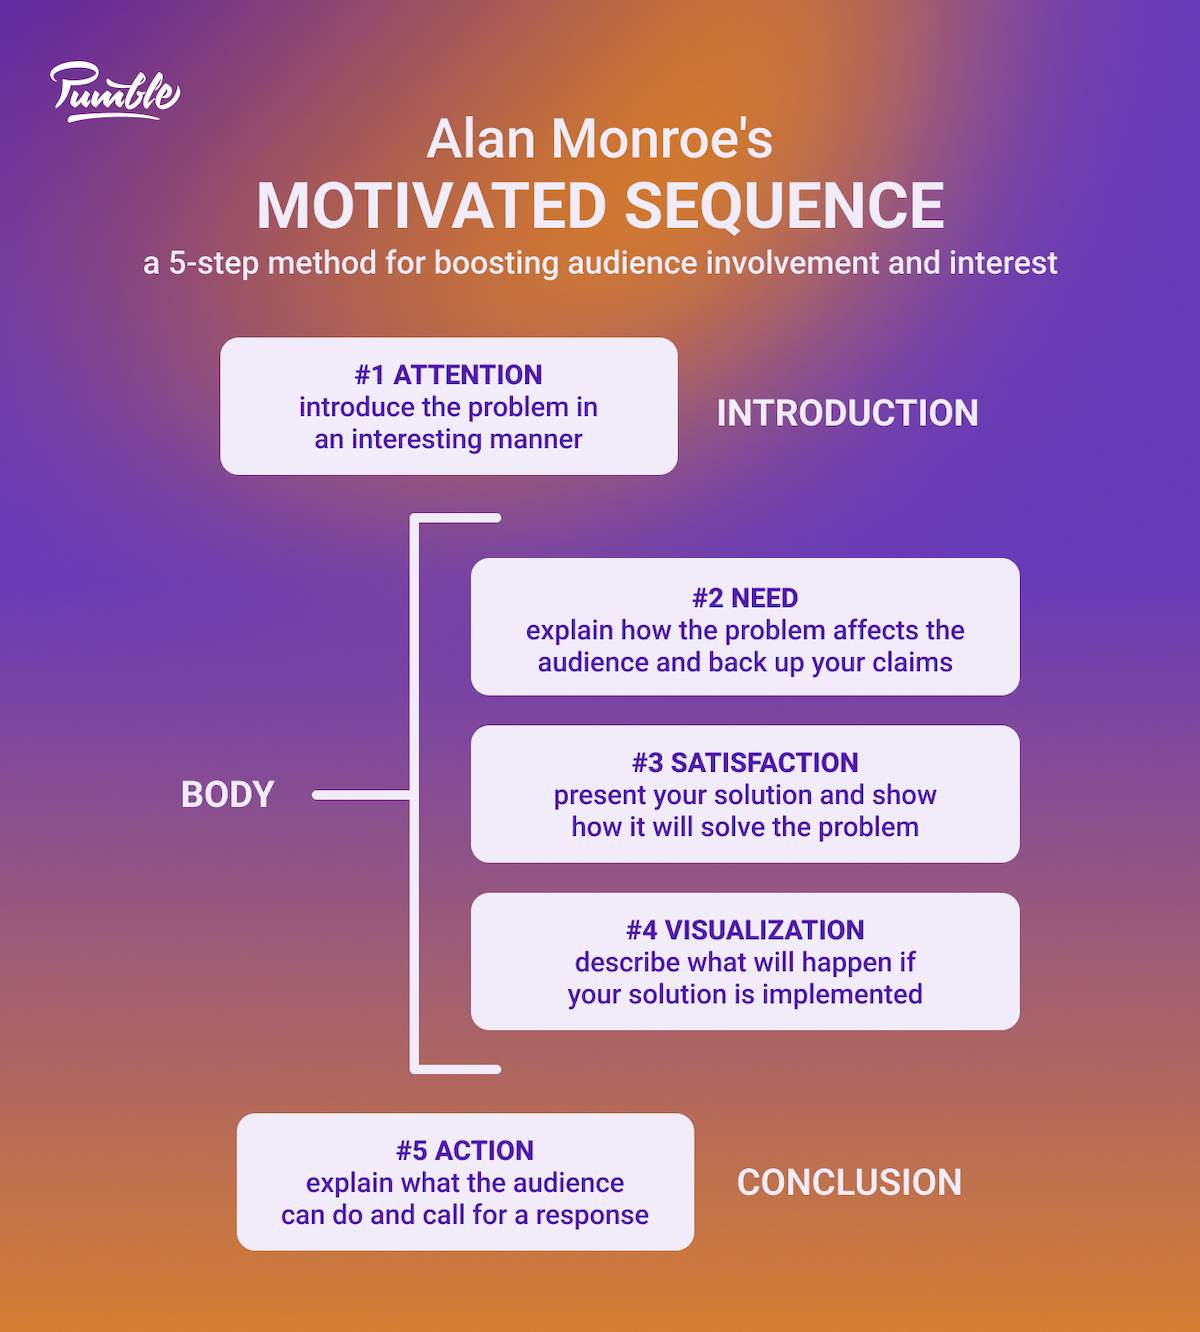 A visual representation of a motivated sequence, a 5-step method of persuasion developed by psychologist Alan Monroe